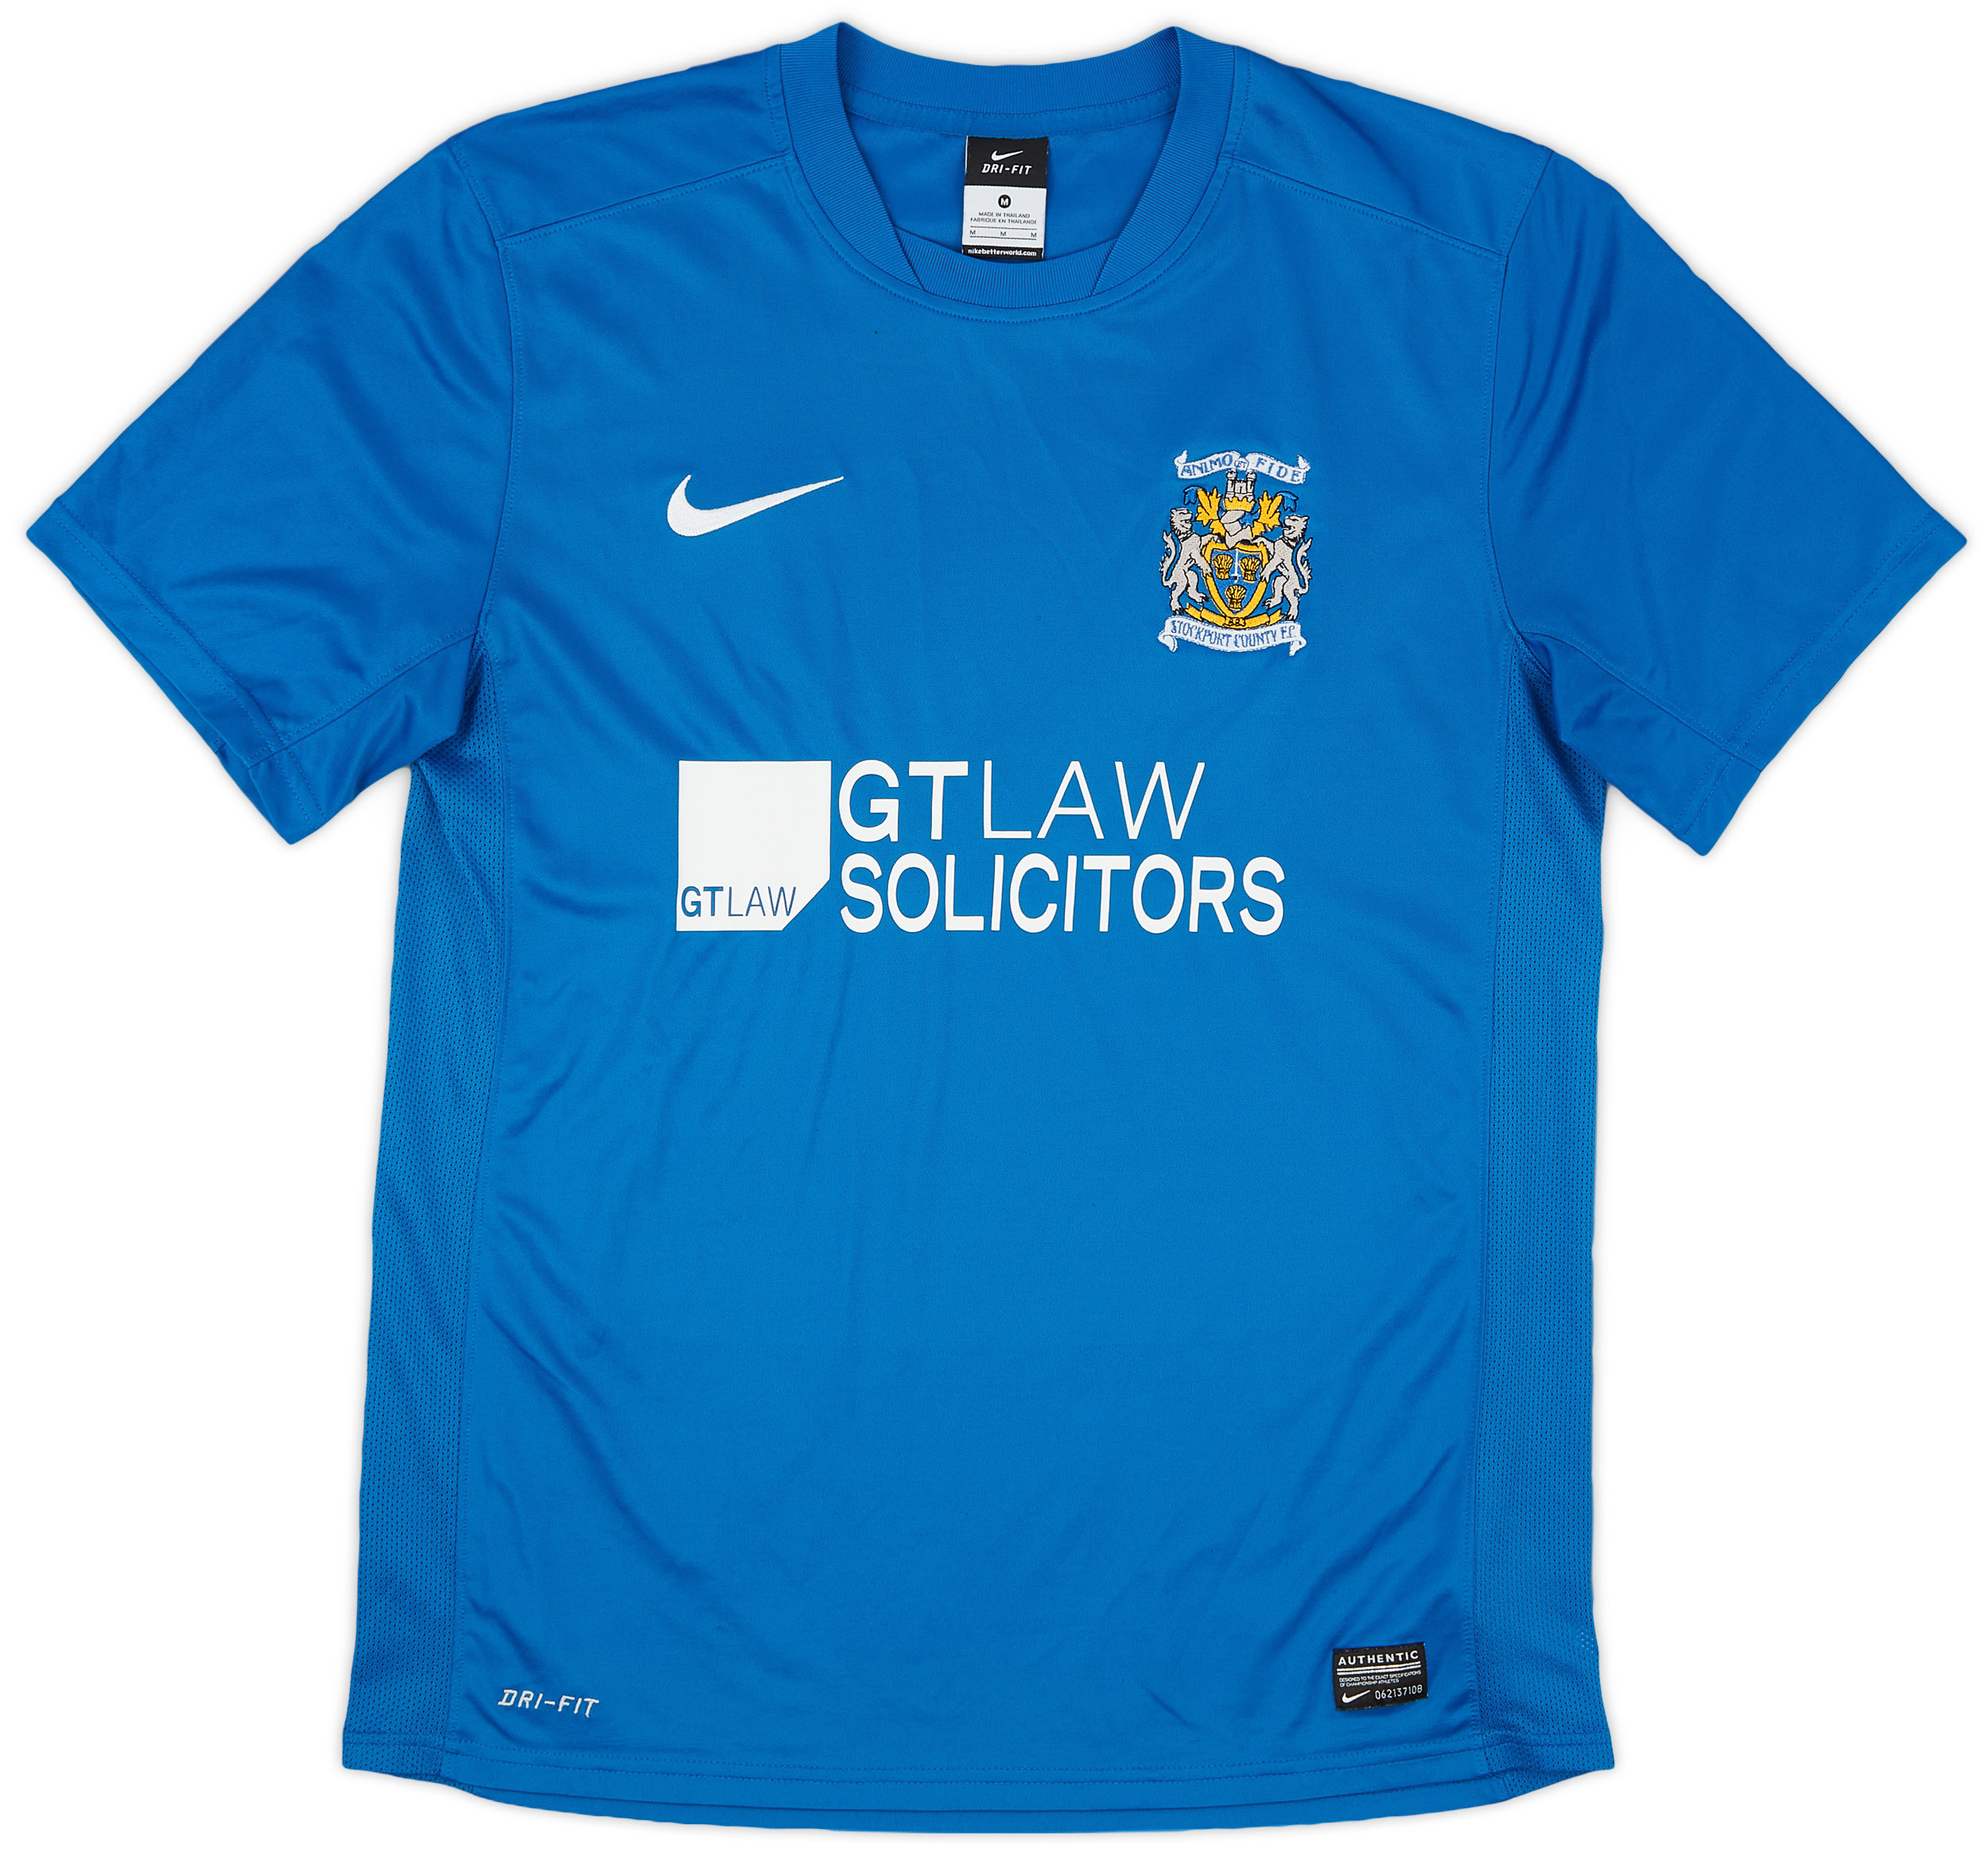 2012-13 Stockport County Home Shirt - 8/10 - ()